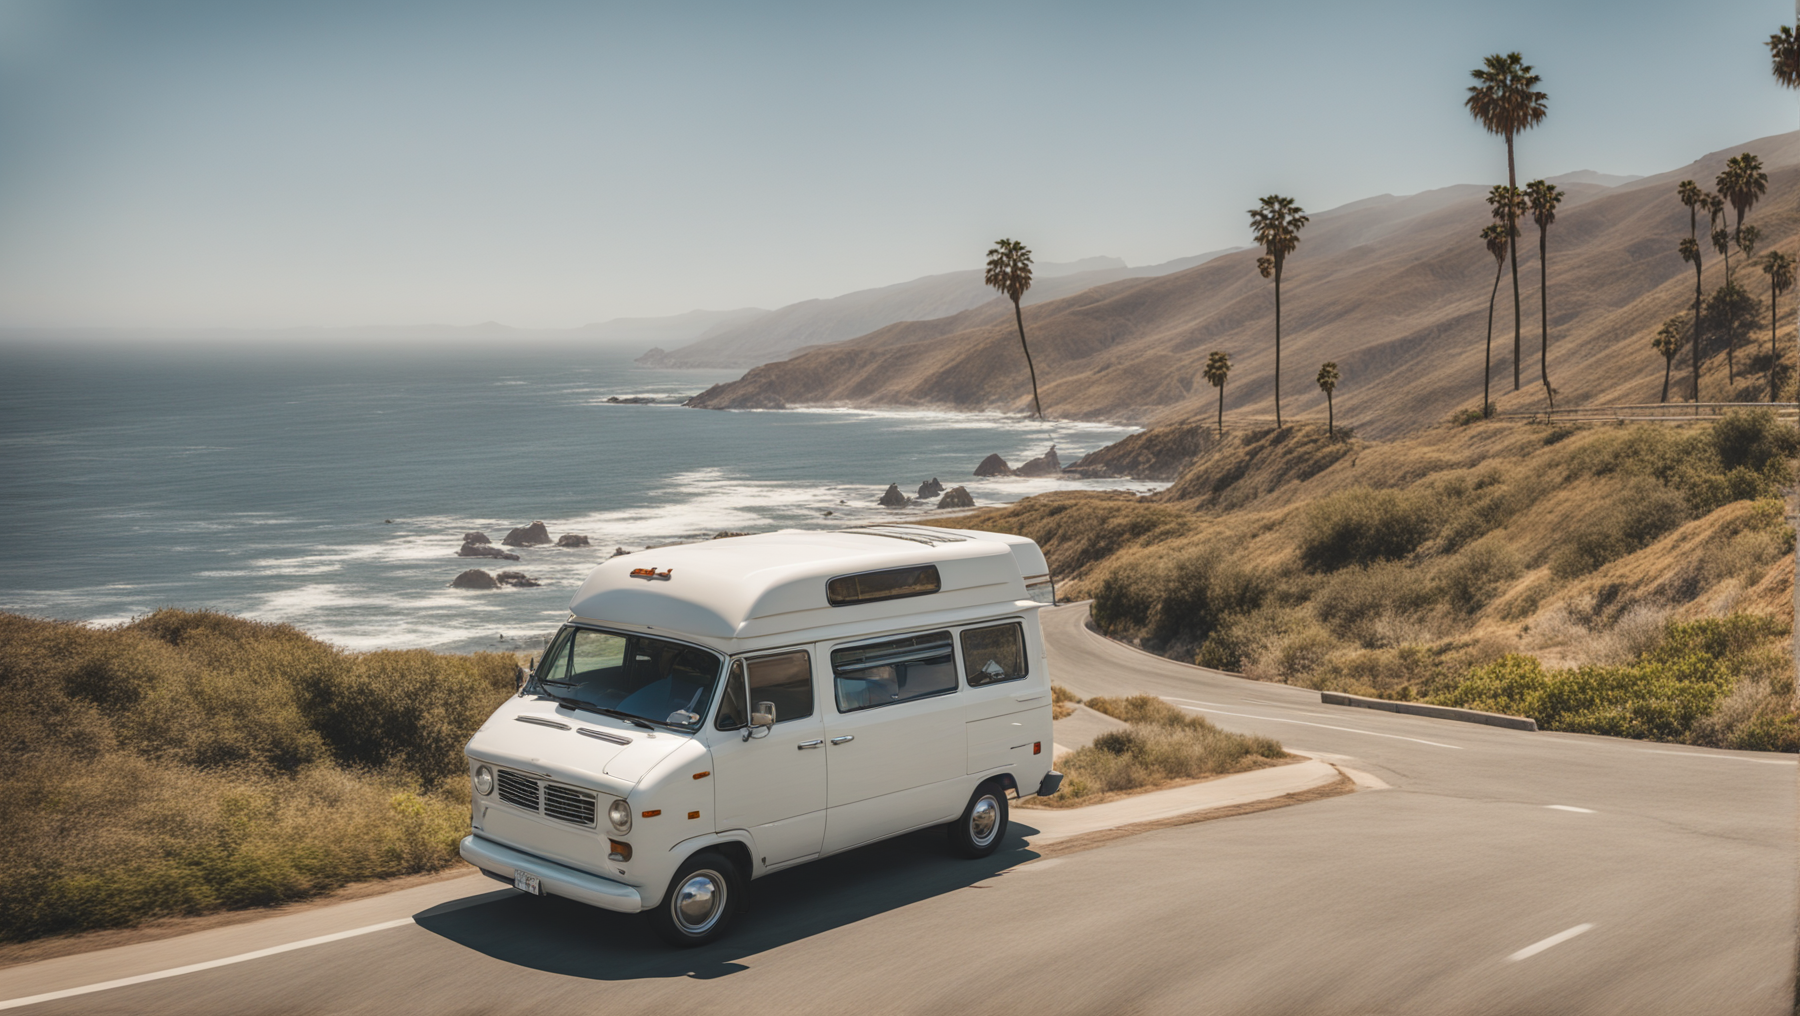 Hero shot image displaying a white campervan driving along the a sunny coastline.